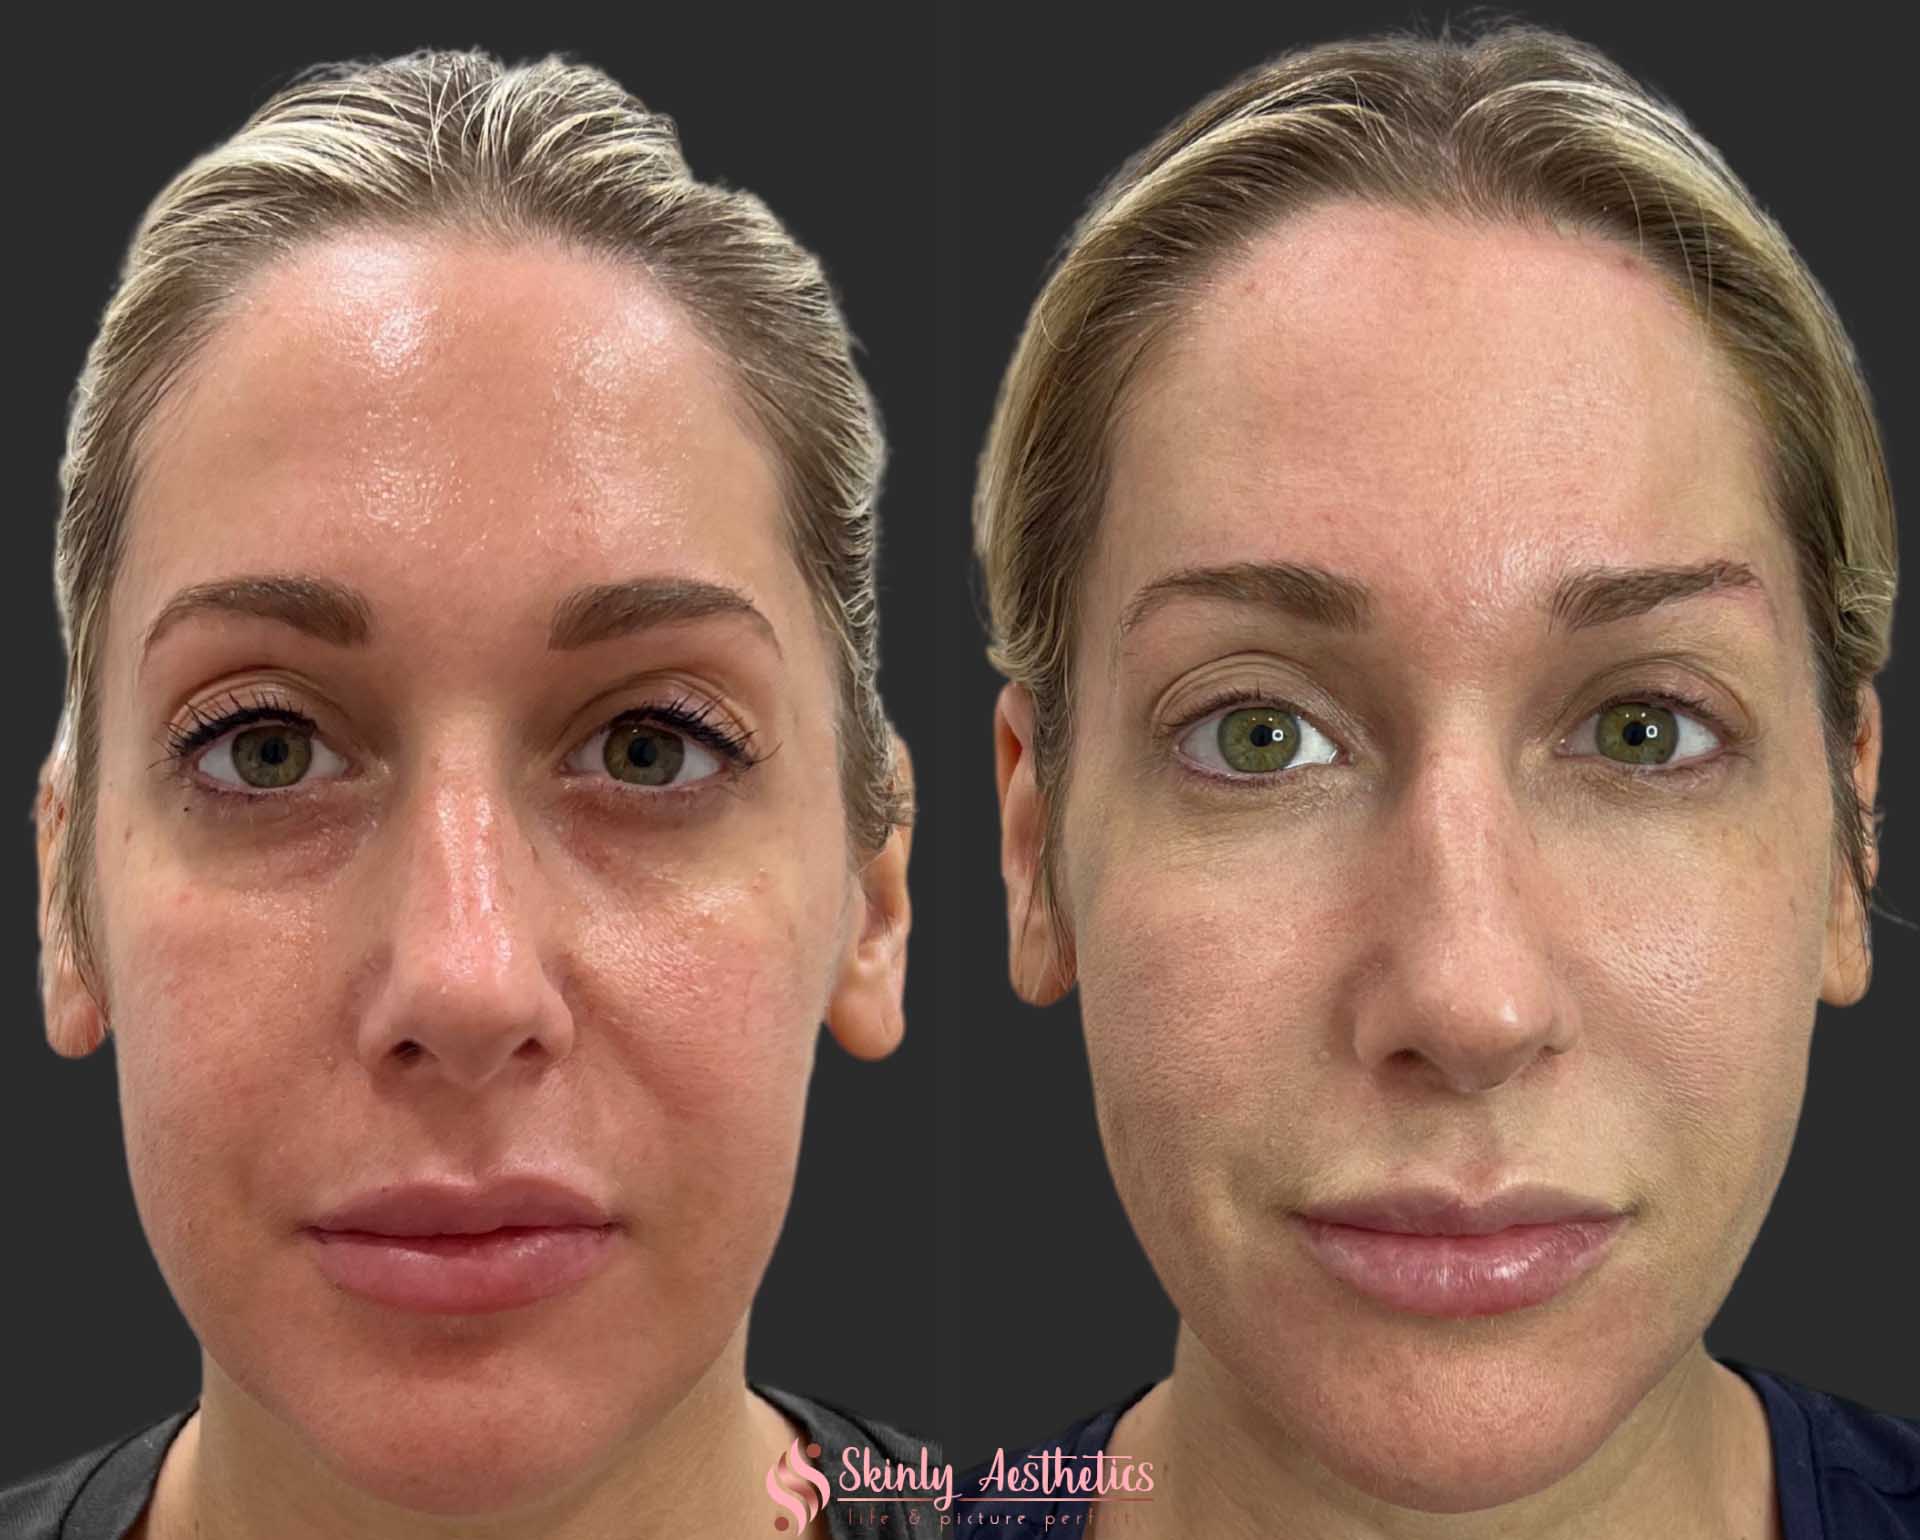 results after PDO thread facelift to lift saggy cheeks and jowls